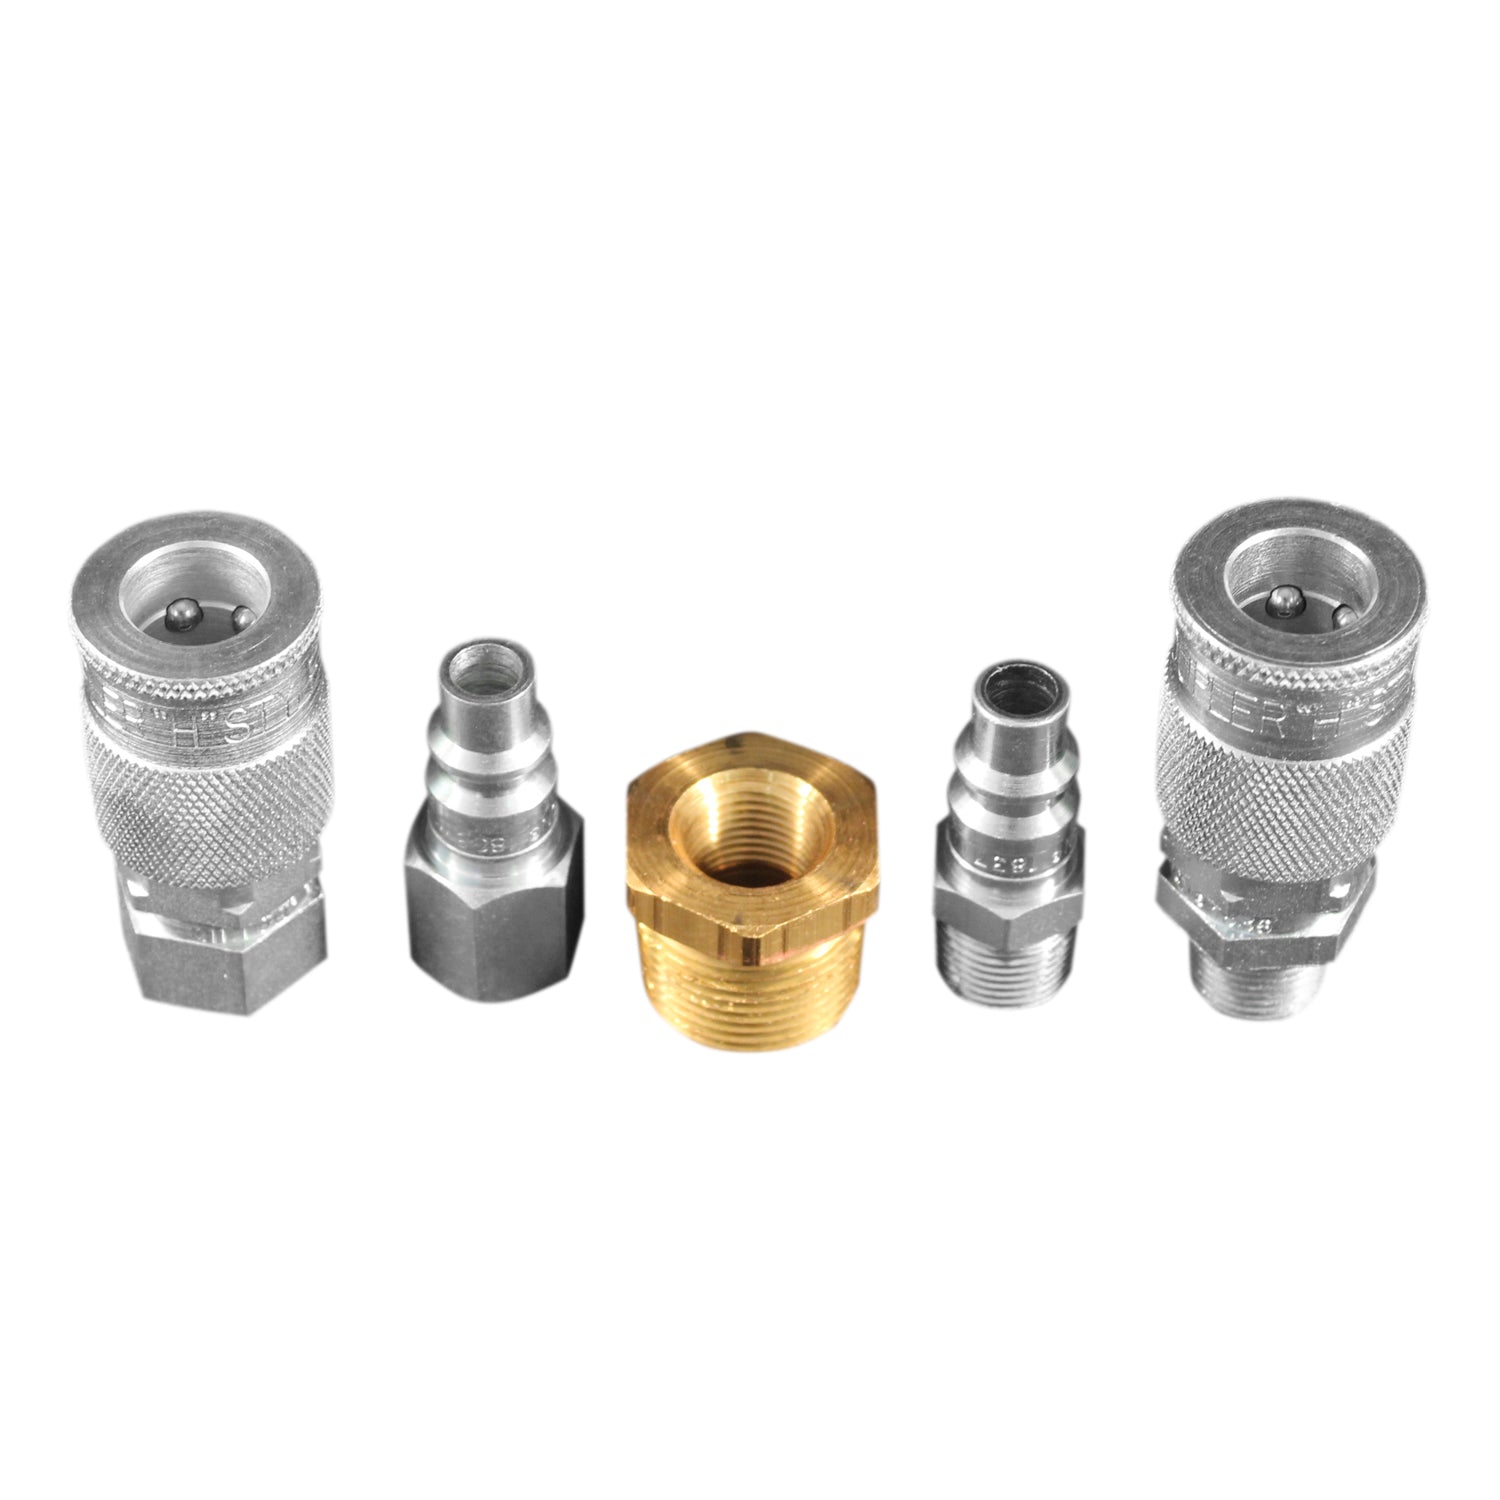 H-Style Coupler and Plug Reducer Kit